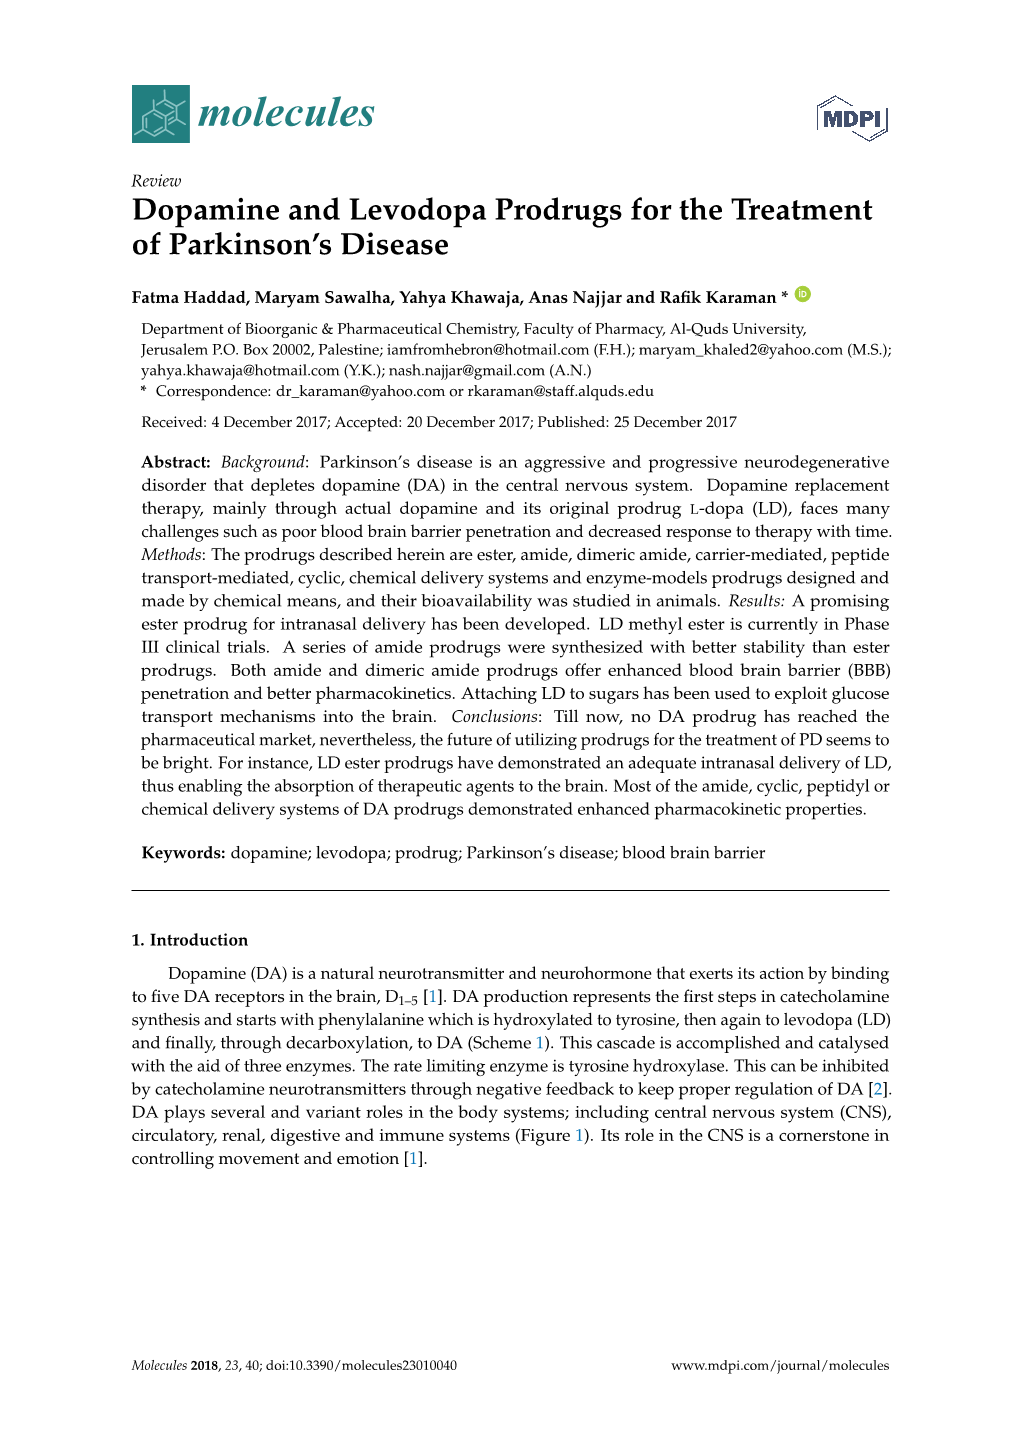 Dopamine and Levodopa Prodrugs for the Treatment of Parkinson's Disease